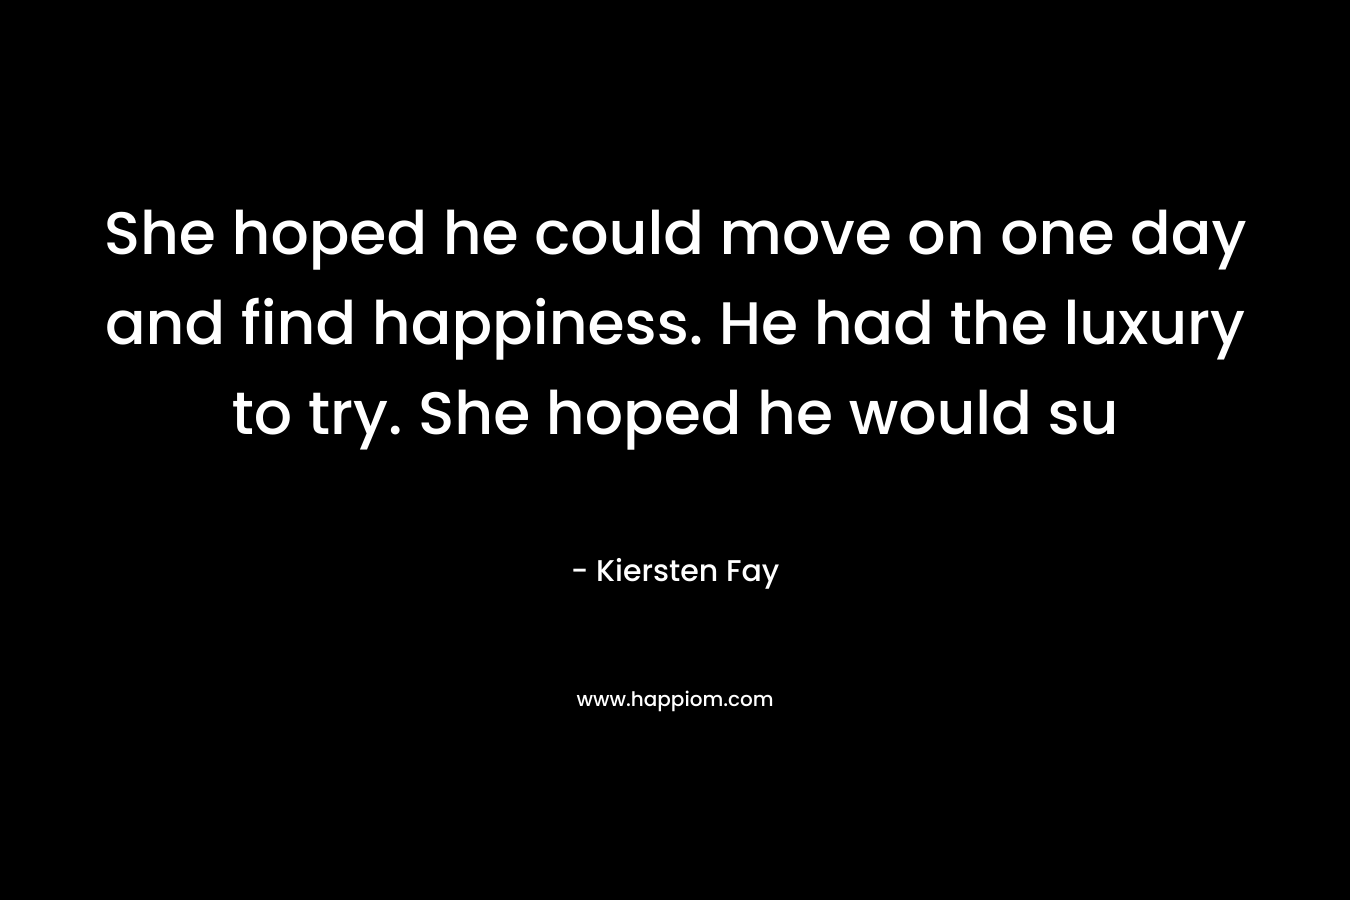 She hoped he could move on one day and find happiness. He had the luxury to try. She hoped he would su